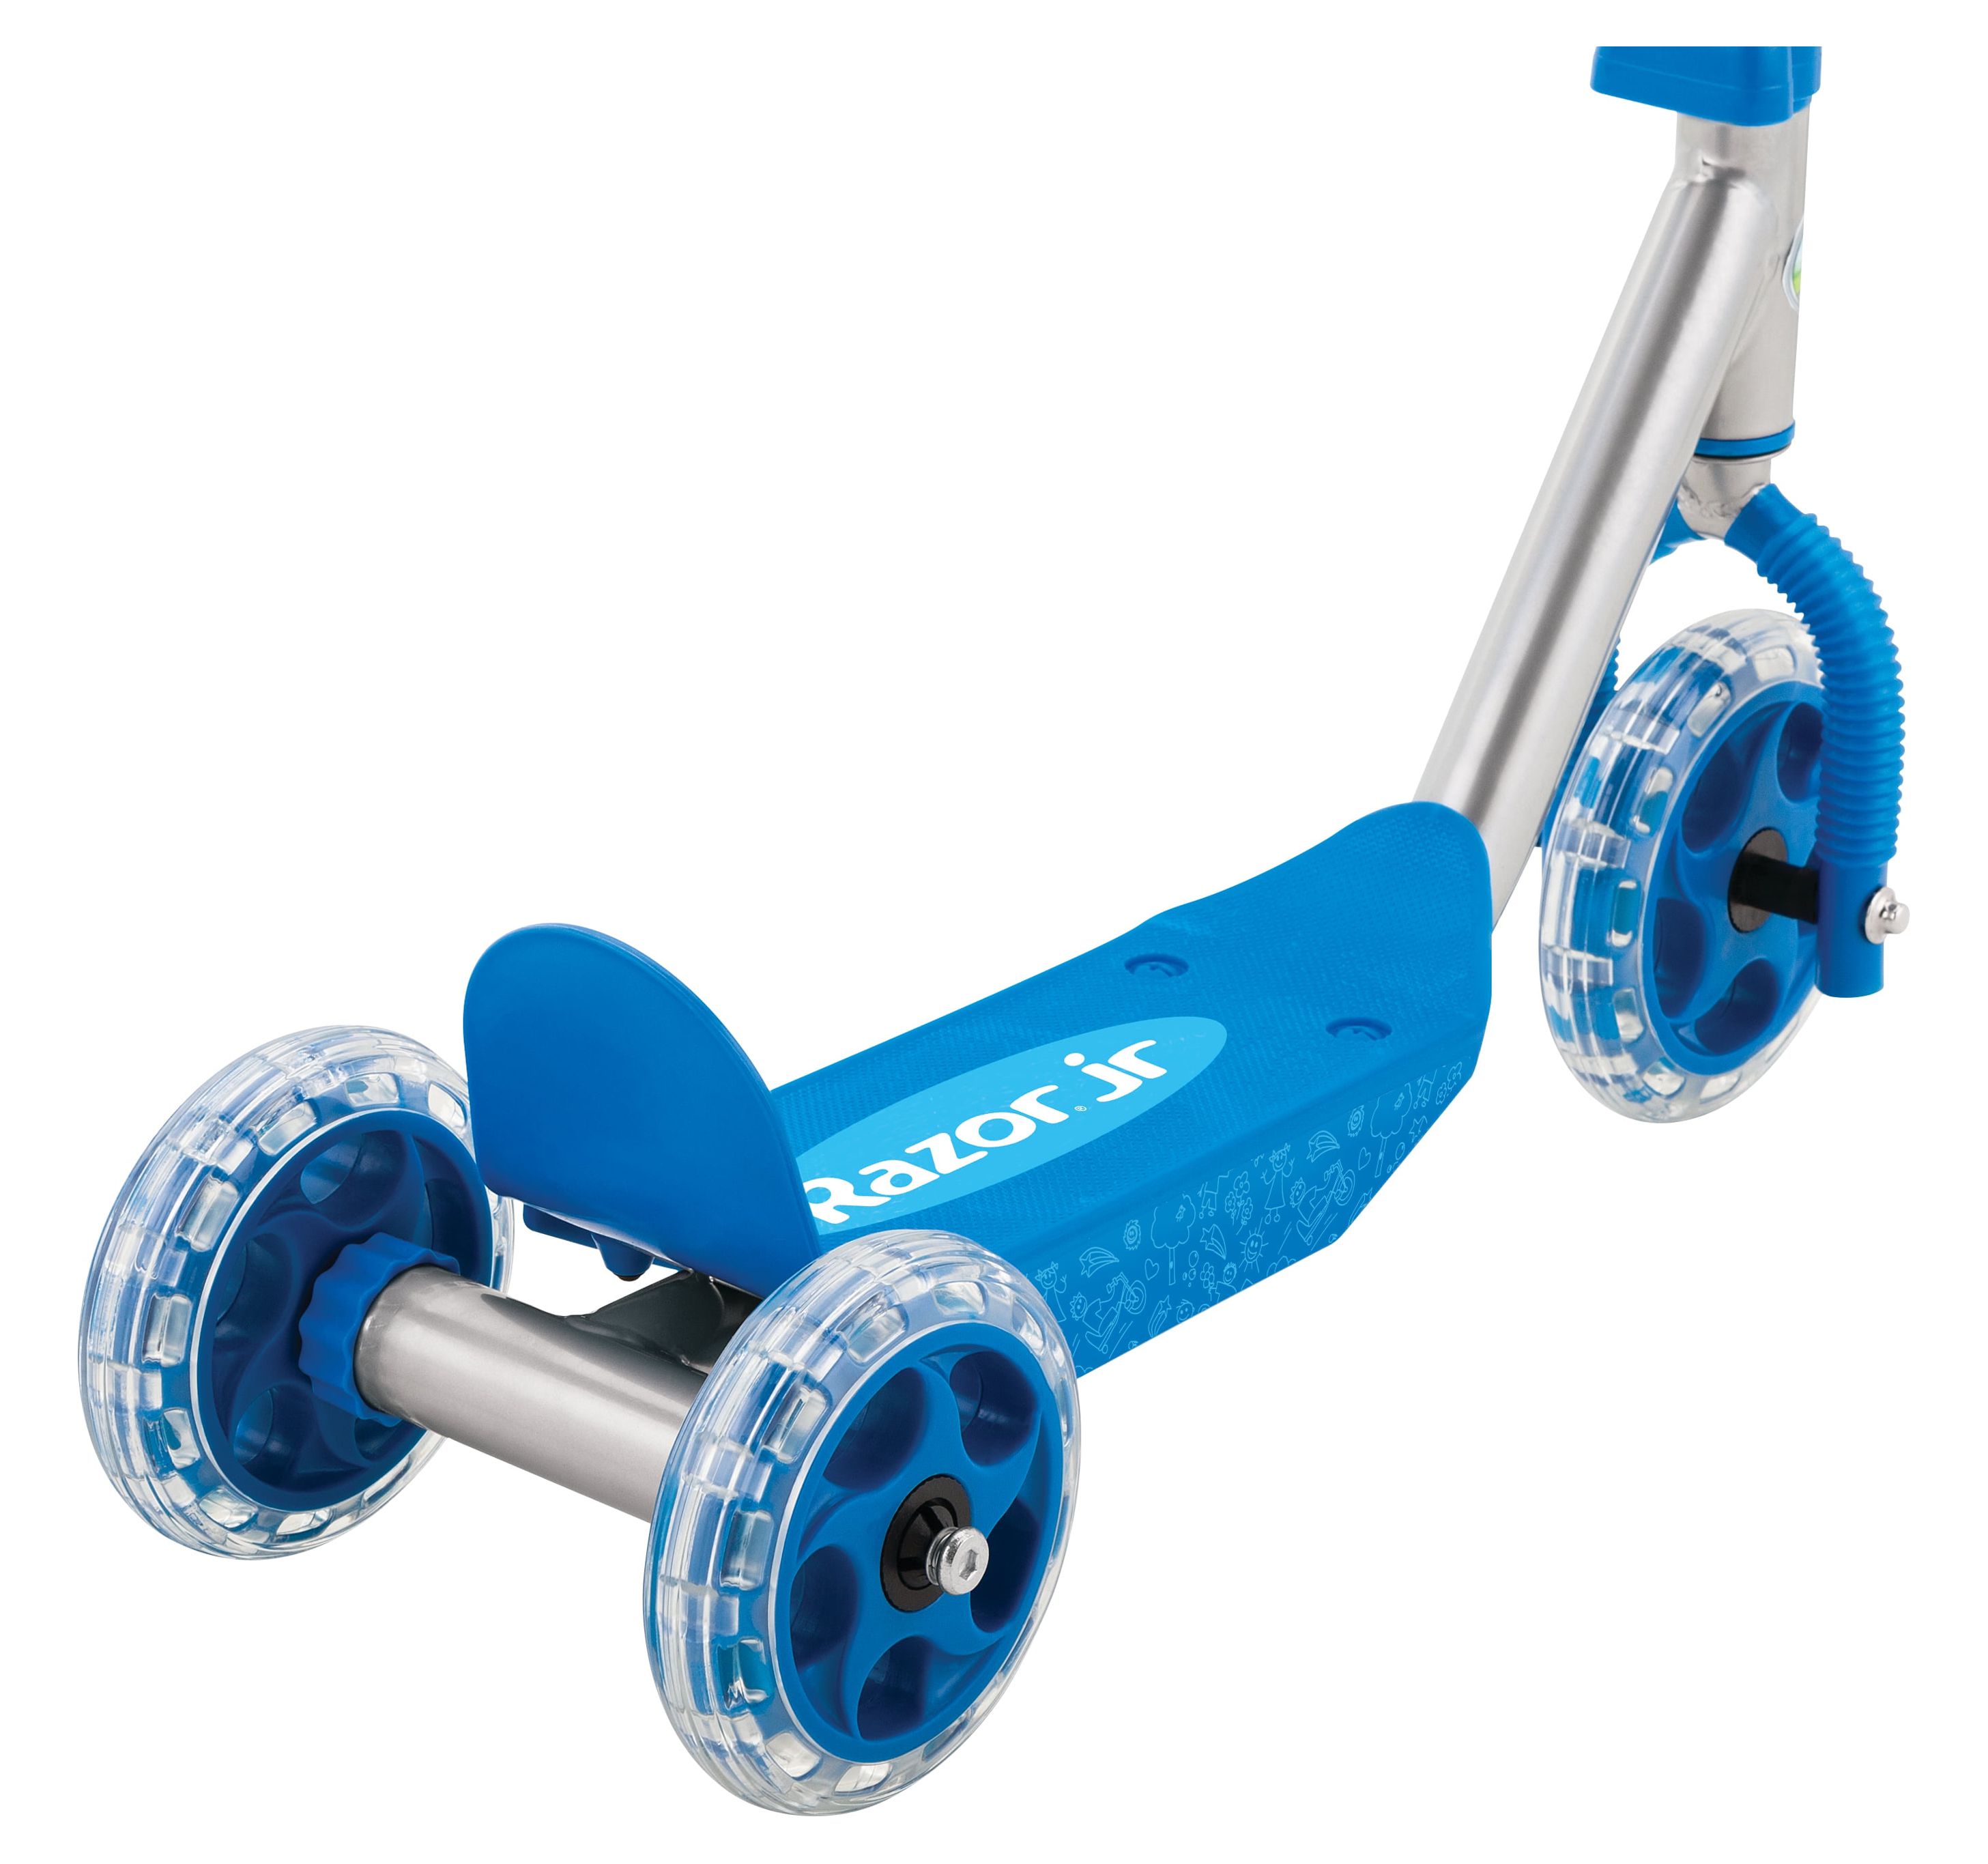 Razor Jr 3-Wheel Lil' Kick Scooter - For Ages 3 and up, Blue - image 2 of 9